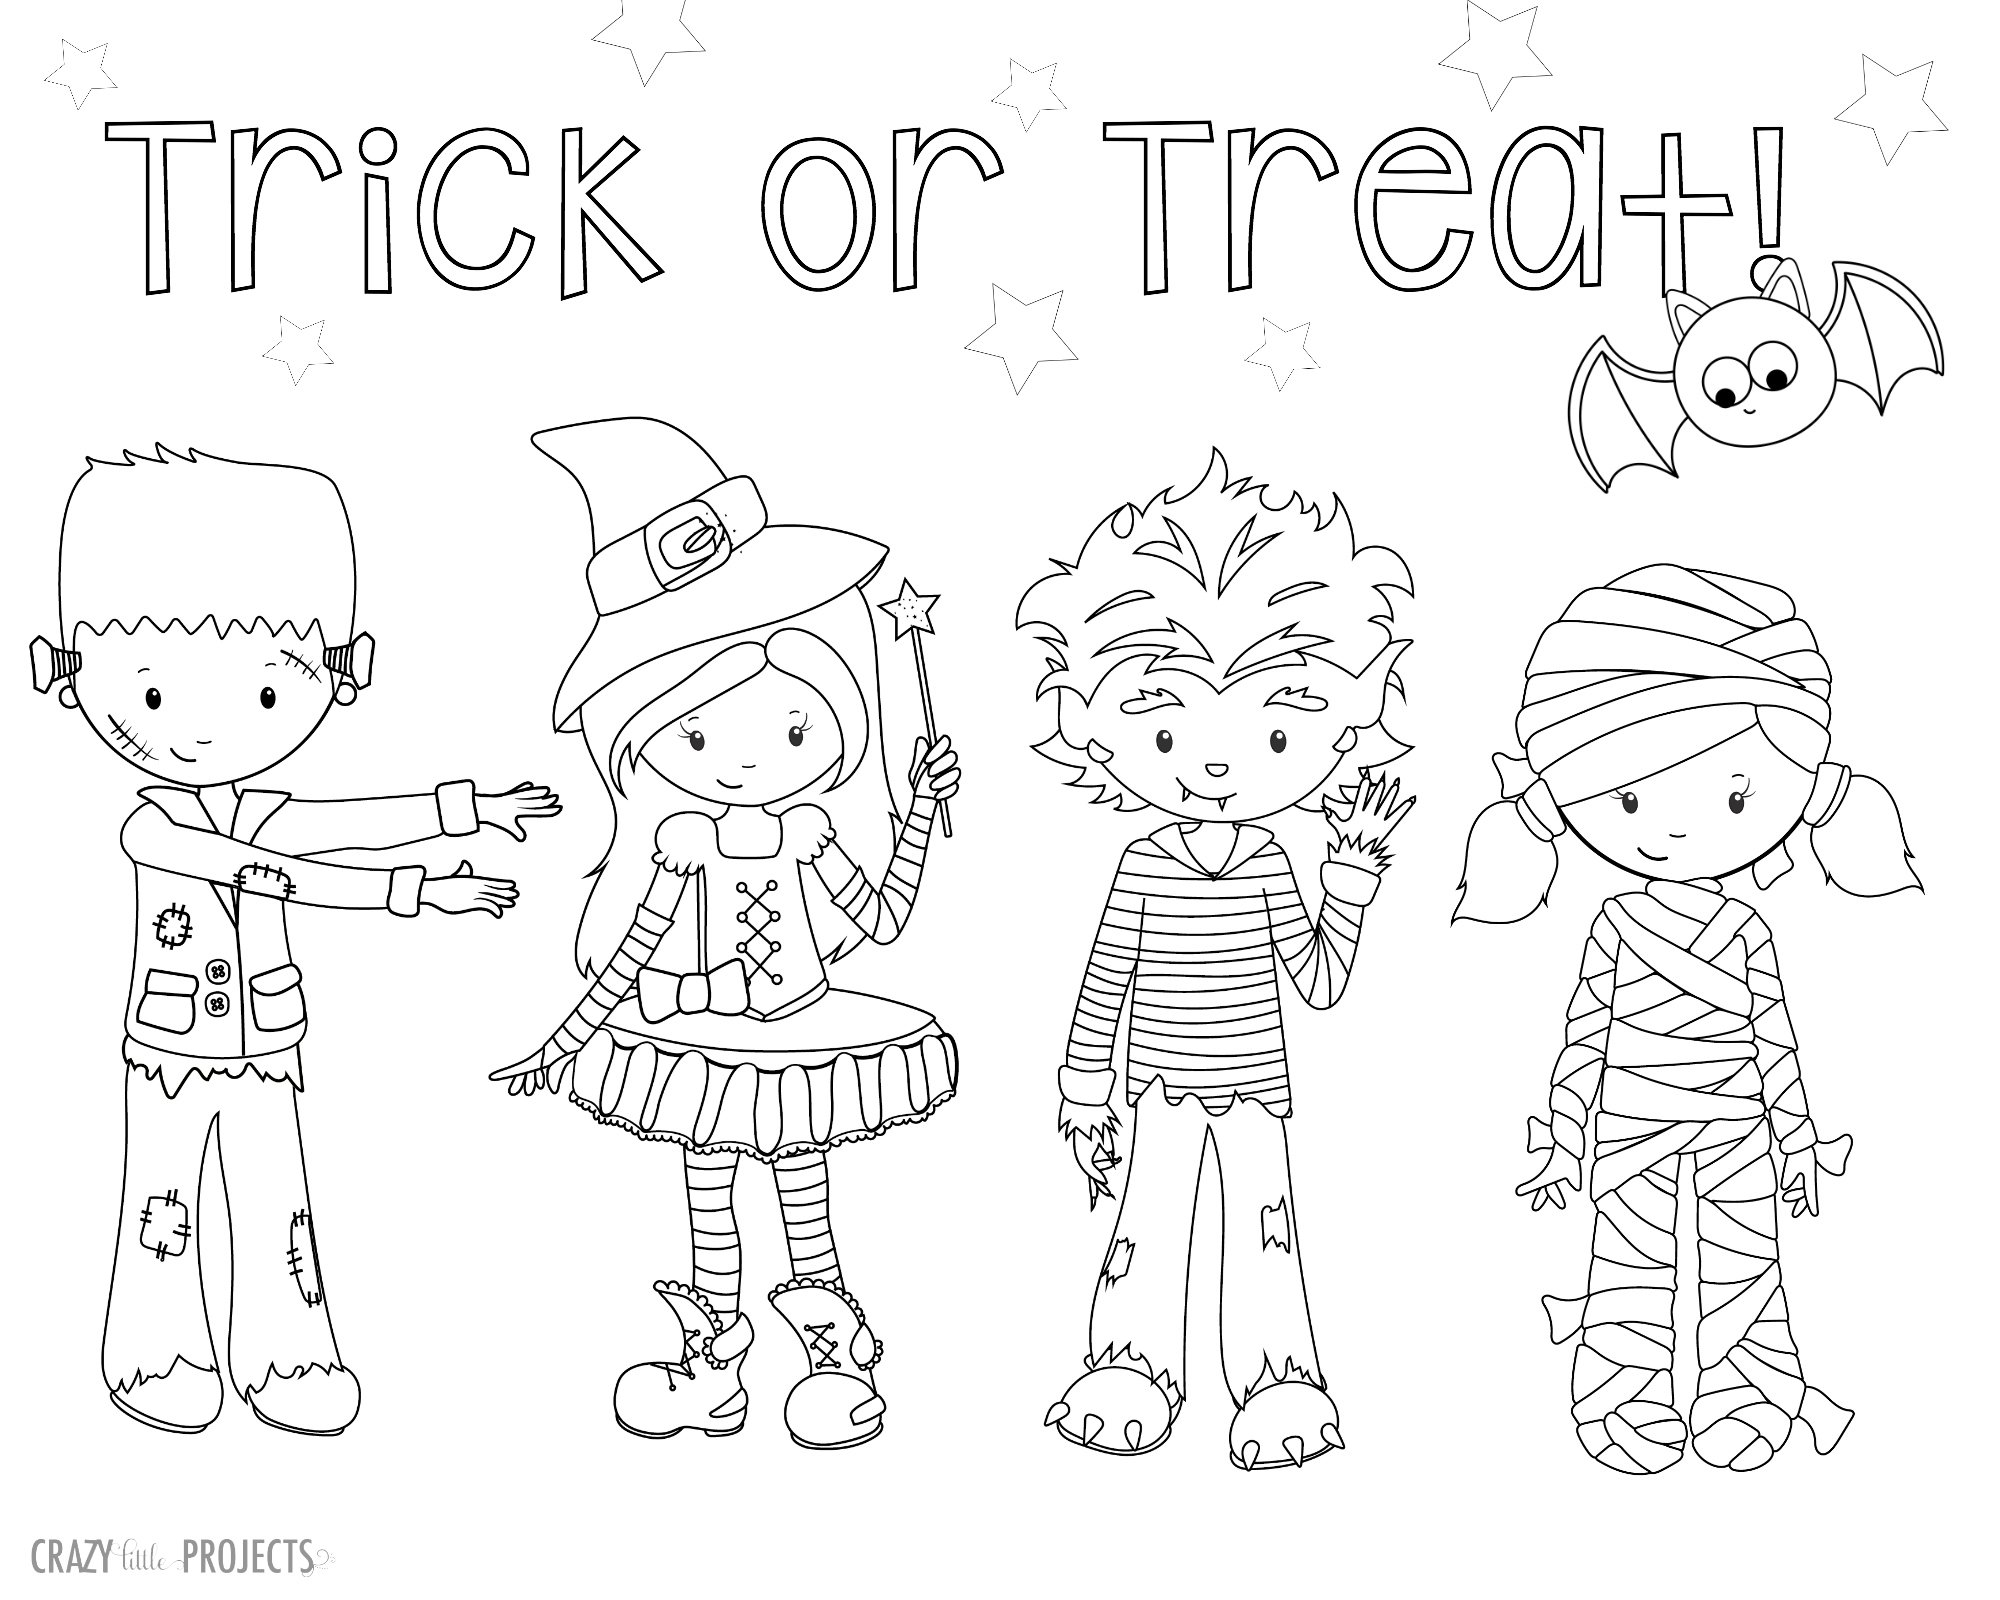 Trick or Treat Coloring Page - Crazy Little Projects